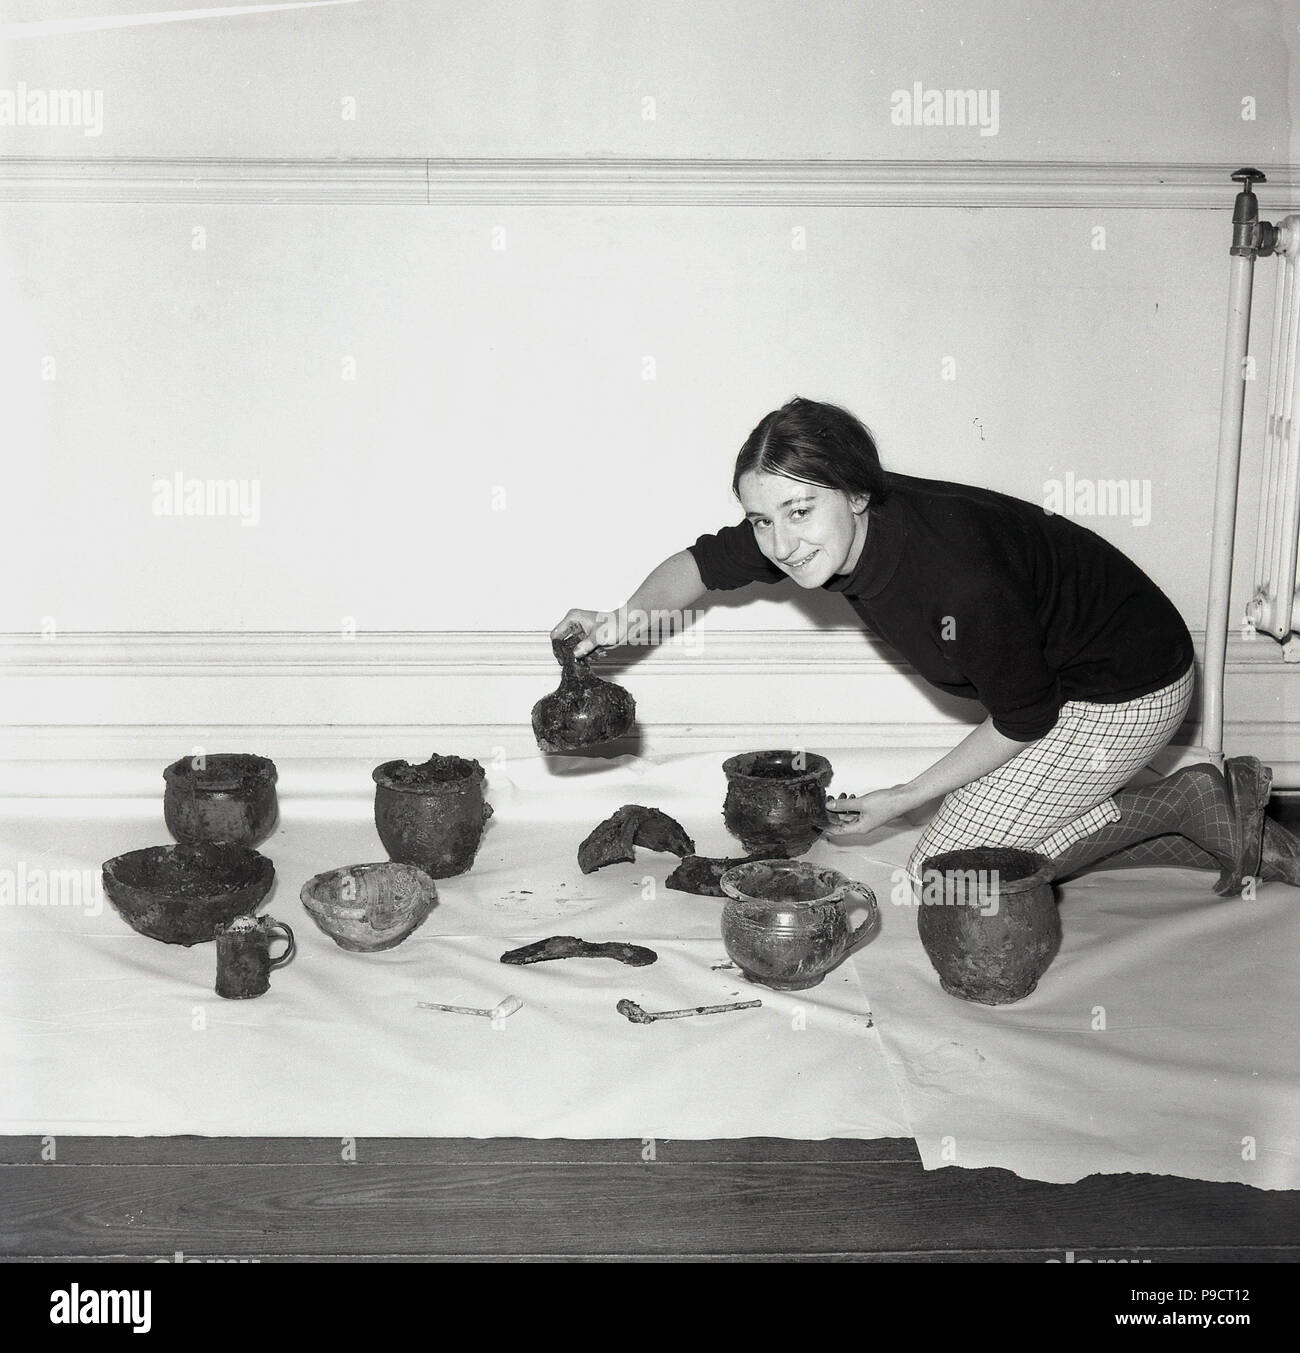 1960s, historical, archaeology, young female archaelogist with a display of archaeological or recovery artifacts, including ancient pots and bowls. The science  of archaeolgy grew out of the older multi-disciplinary study known as antiquarianism, the desire to learn more about past societies and the development of the human race. Stock Photo